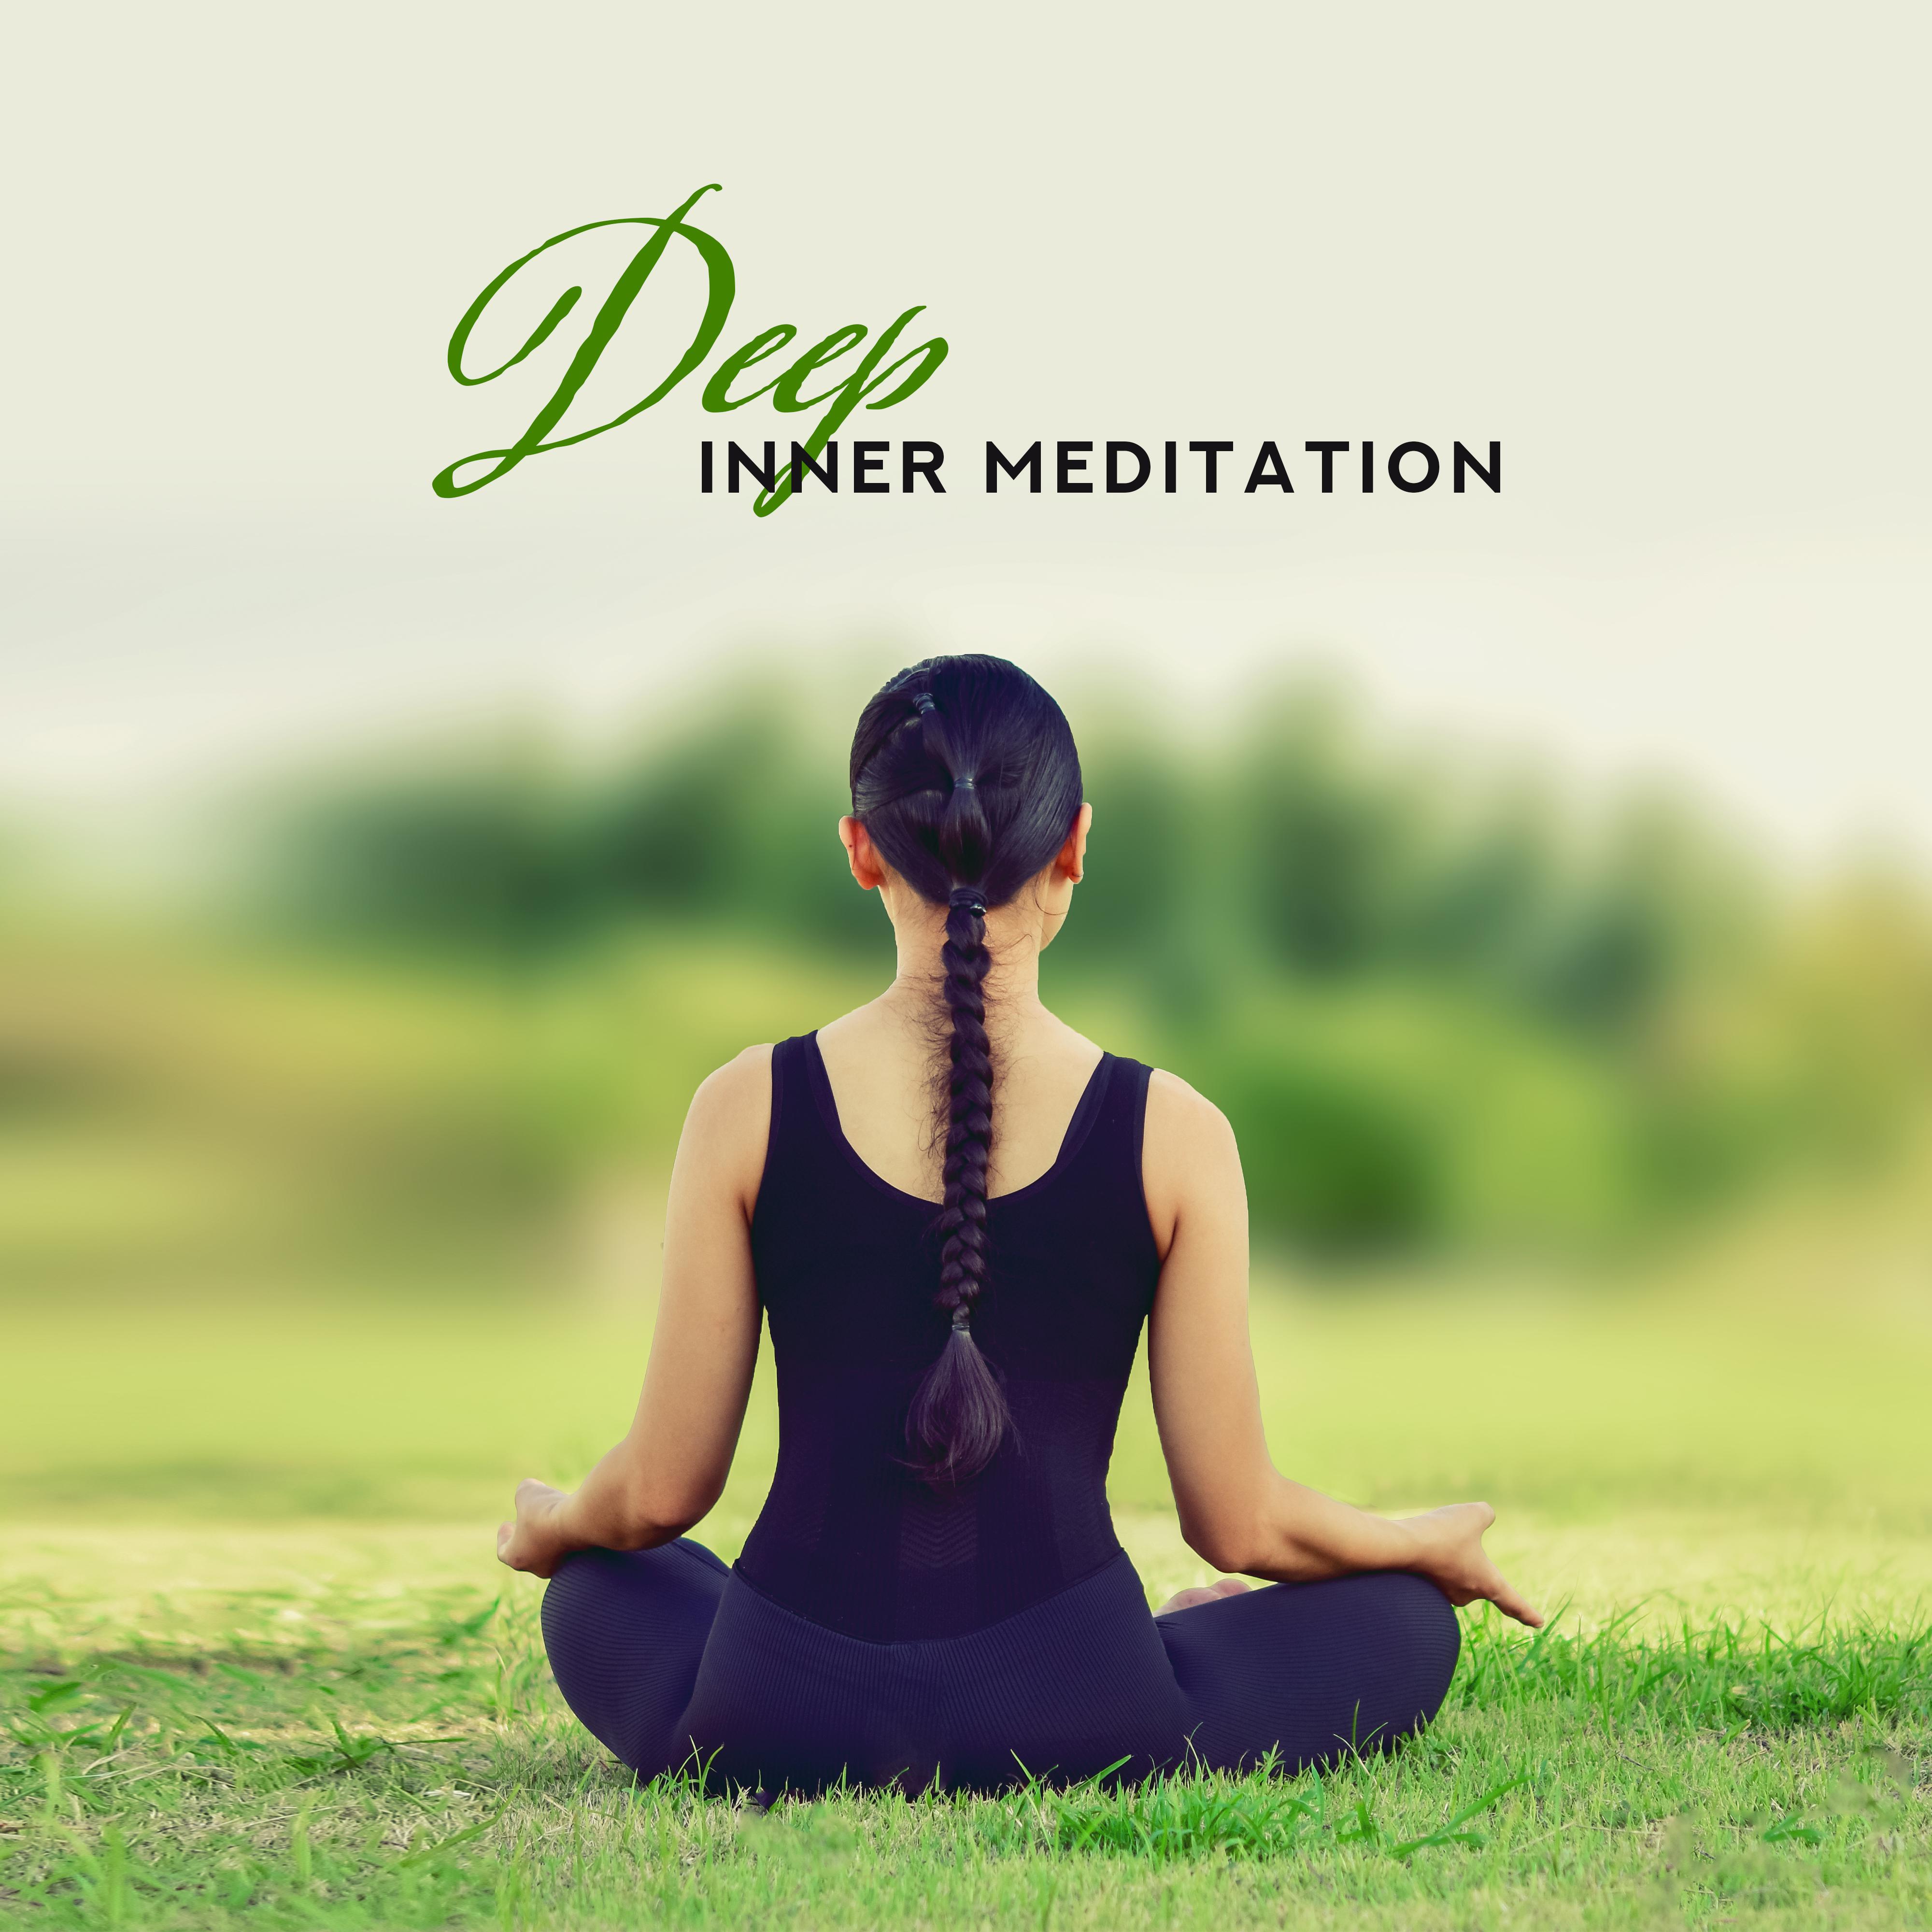 Deep Inner Meditation to Regain Inner Harmony, Balance and Peace, as well as Free Yourself from Negative Emotions, Stress and Anxiety